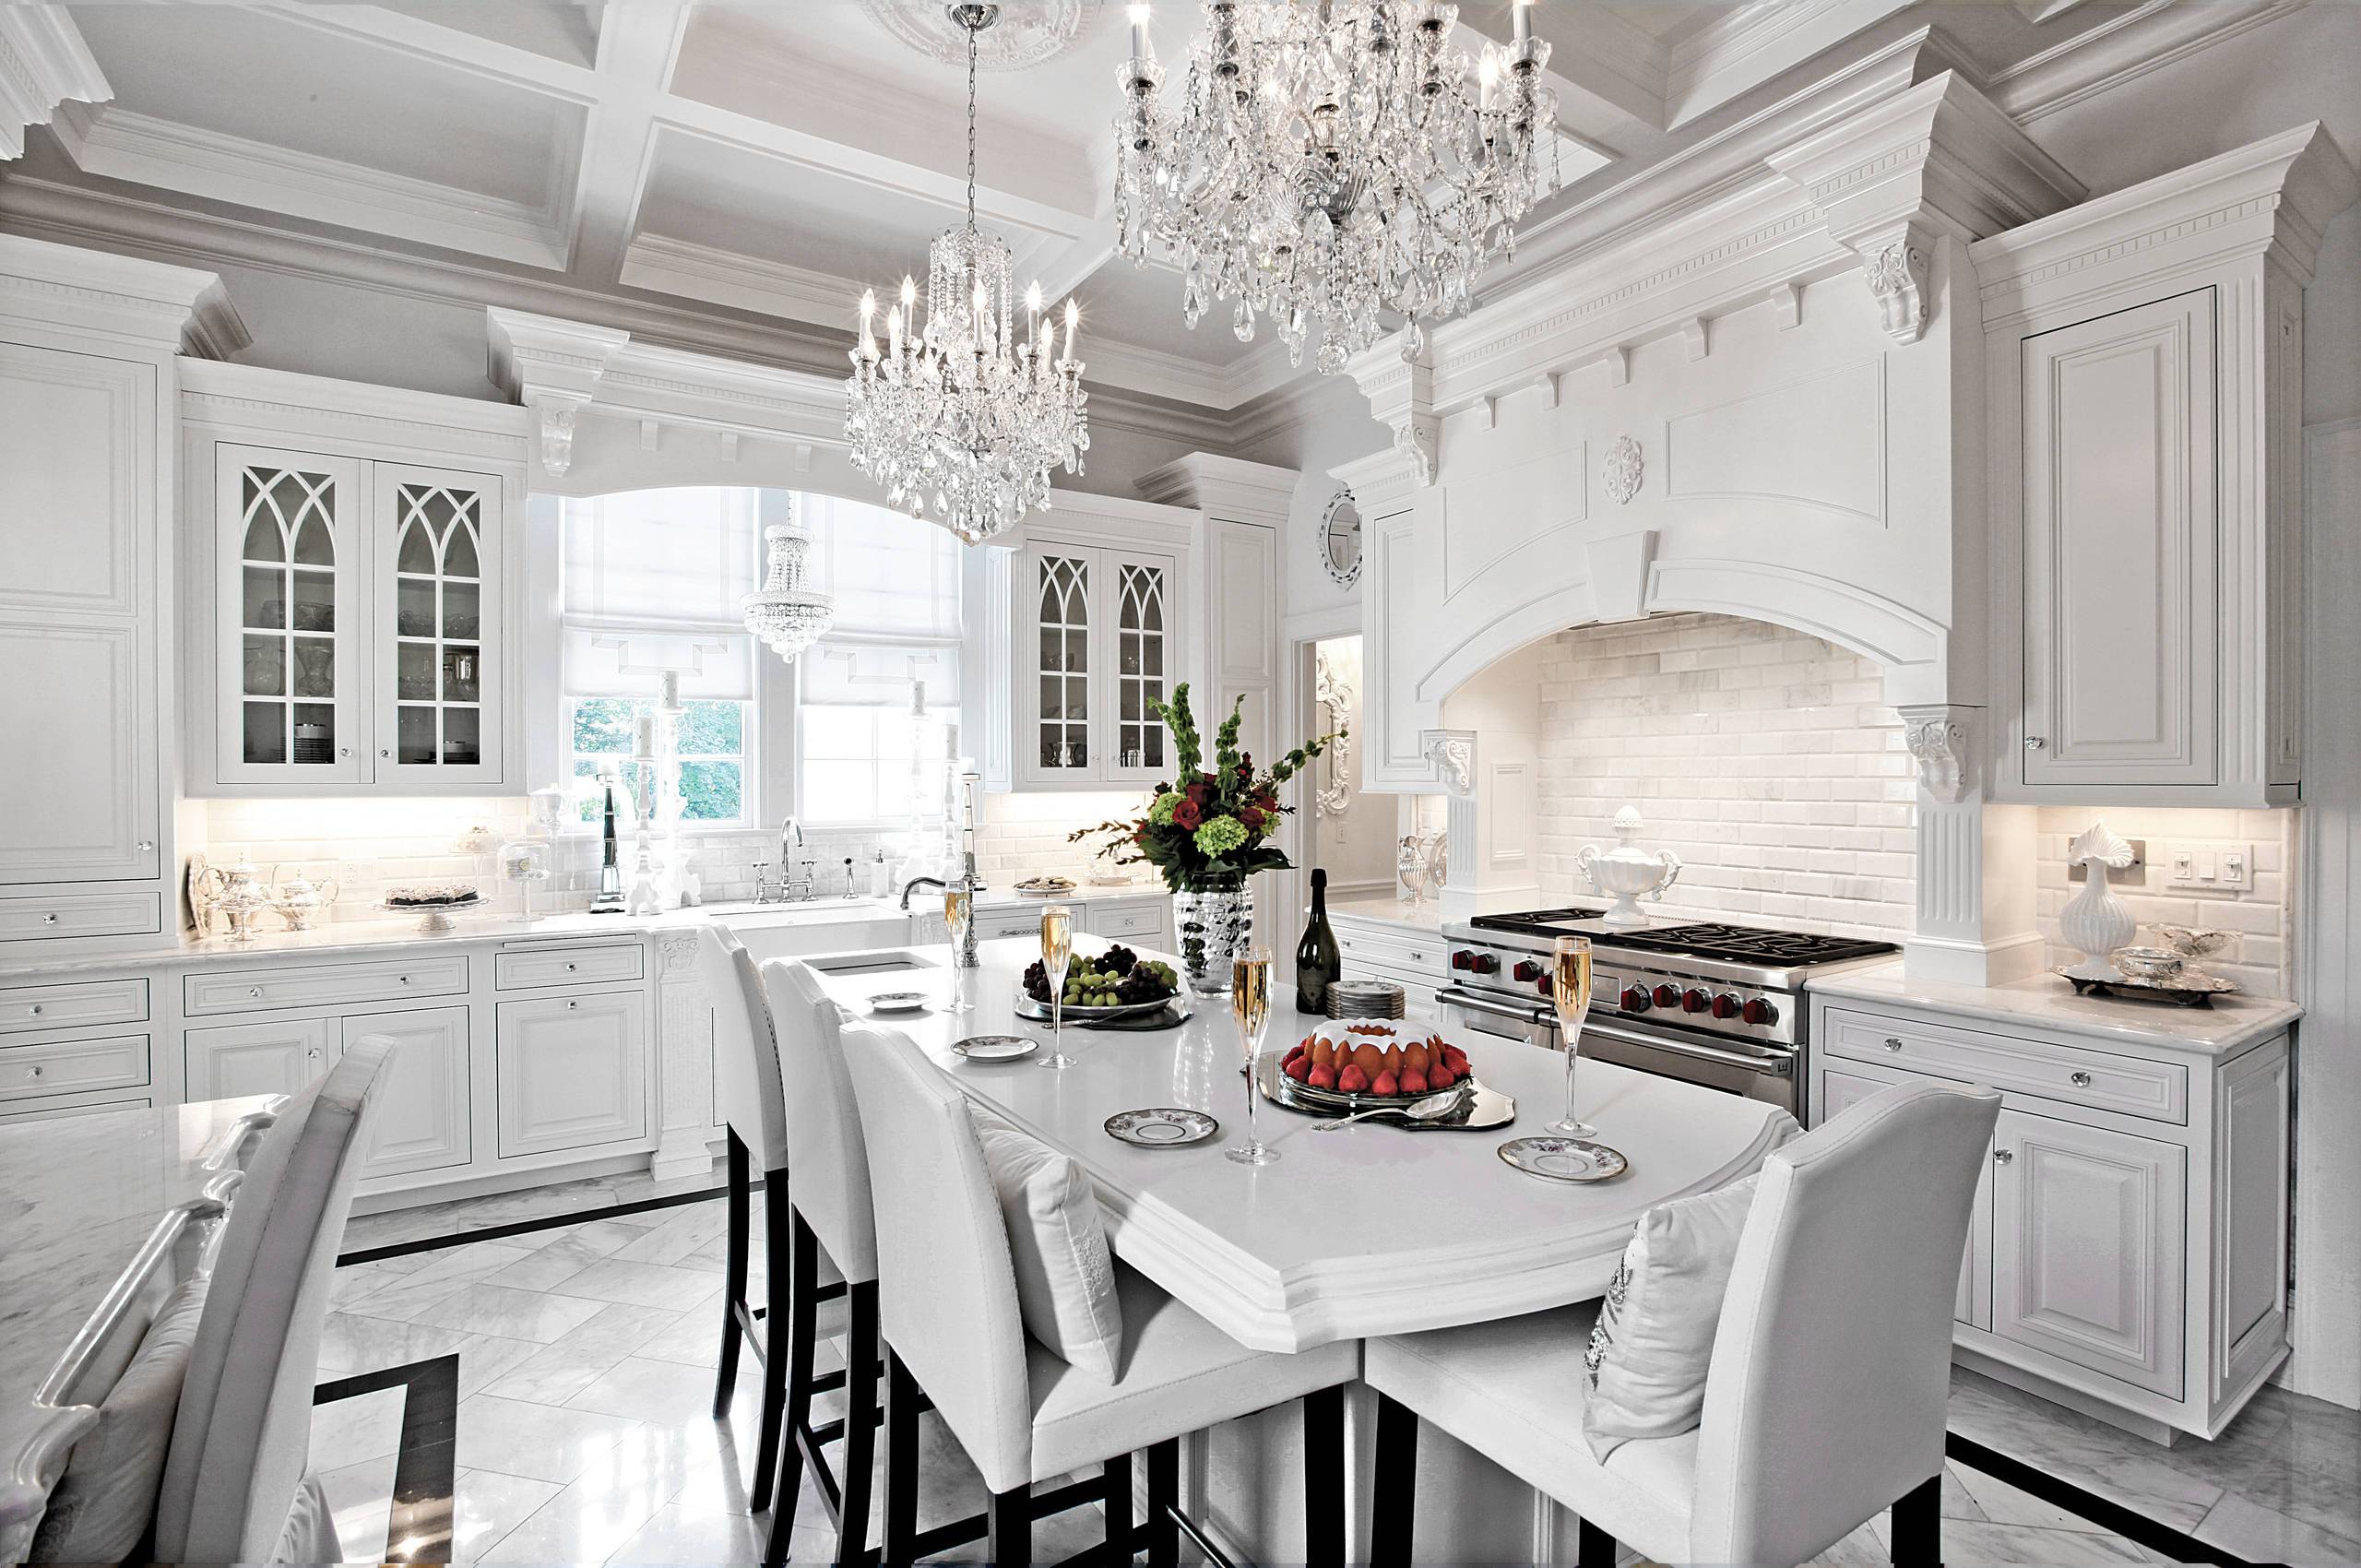 Luxurious chandelier or traditional kitchen design (from Houzz)